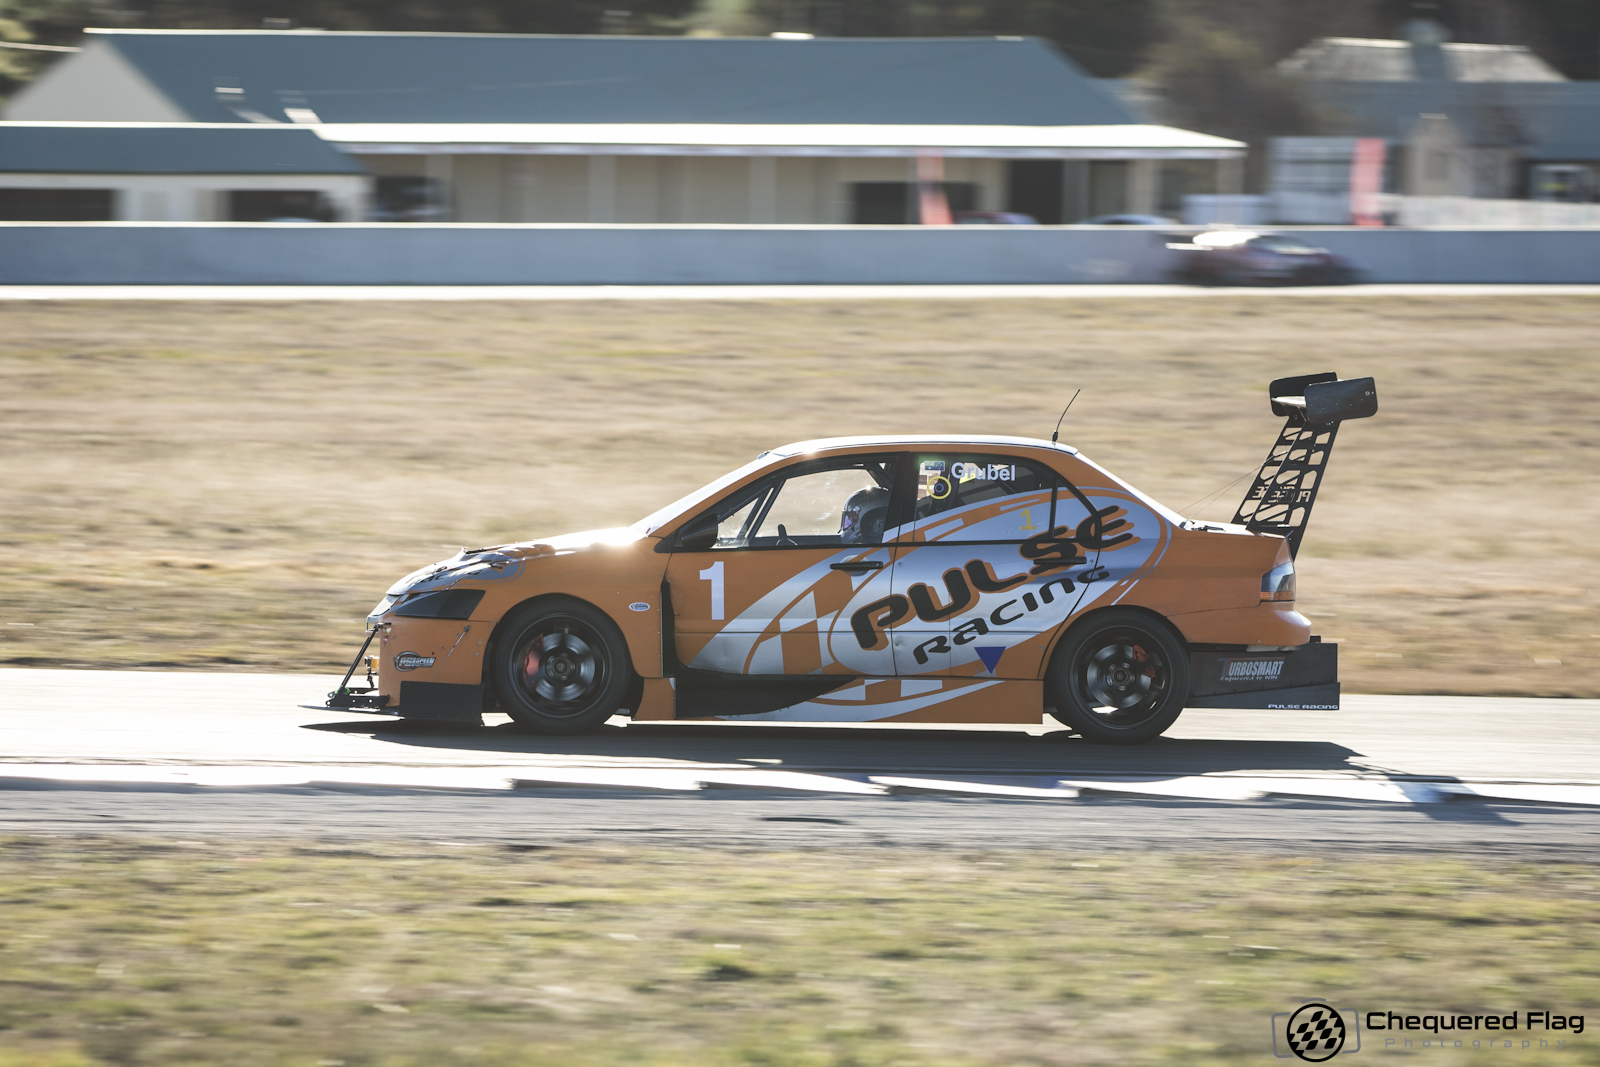 04 - Aus Time Attack - Chequered Flag